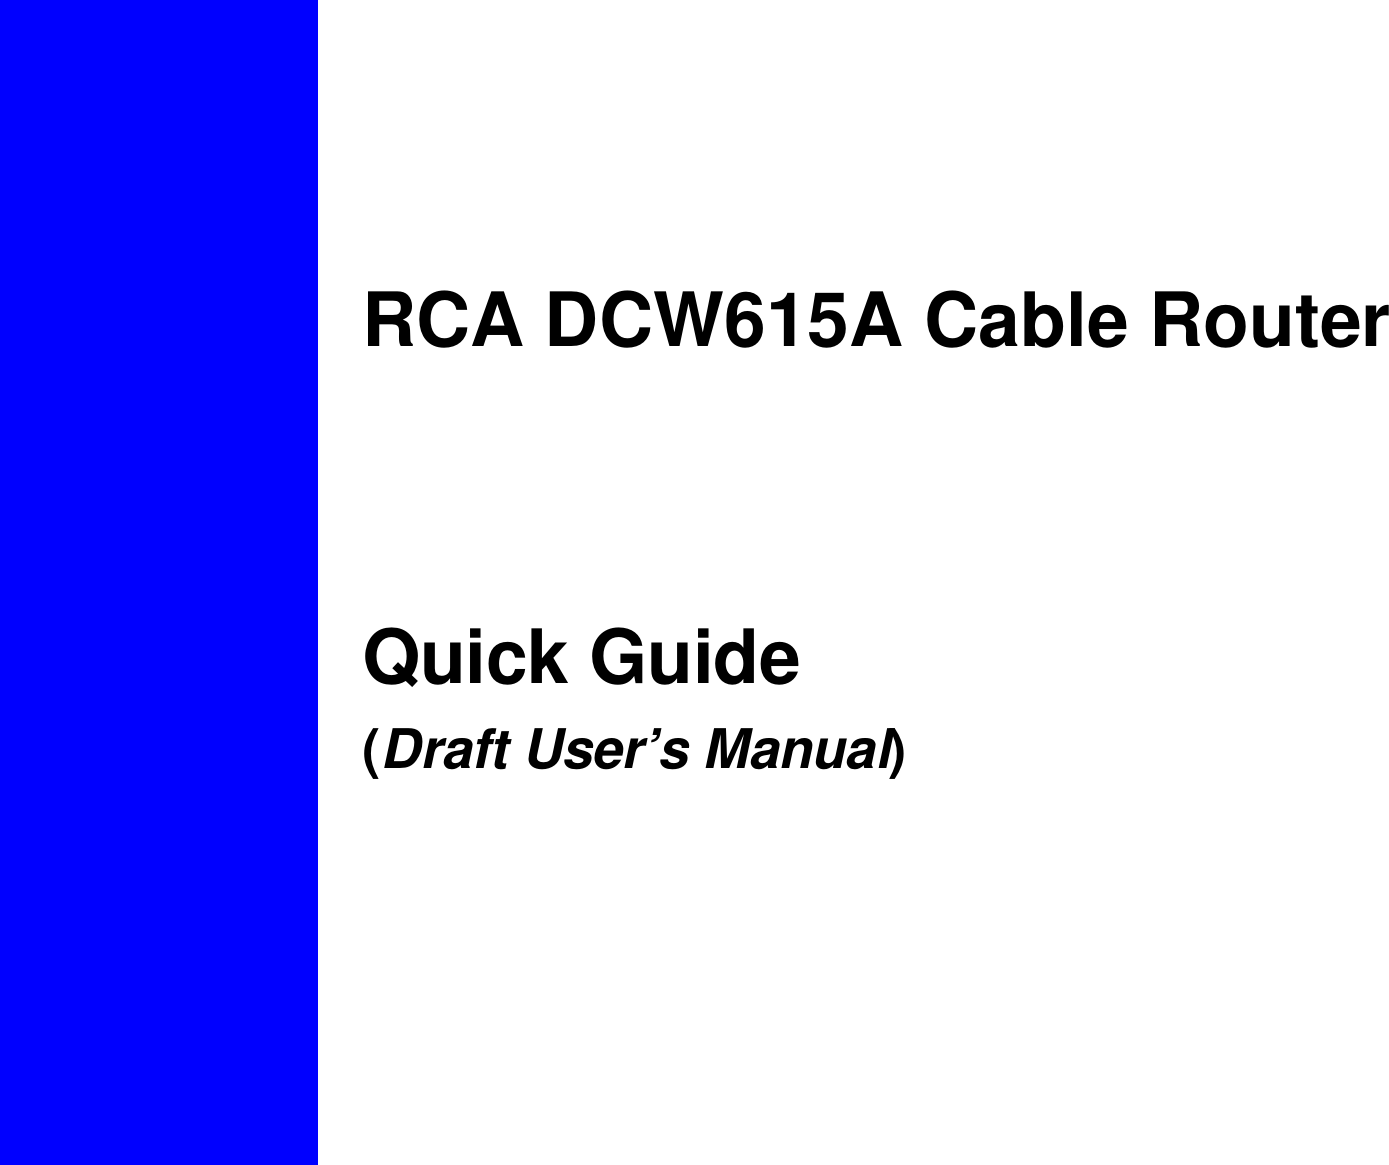  RCA DCW615A Cable Router   Quick Guide (Draft User’s Manual)   